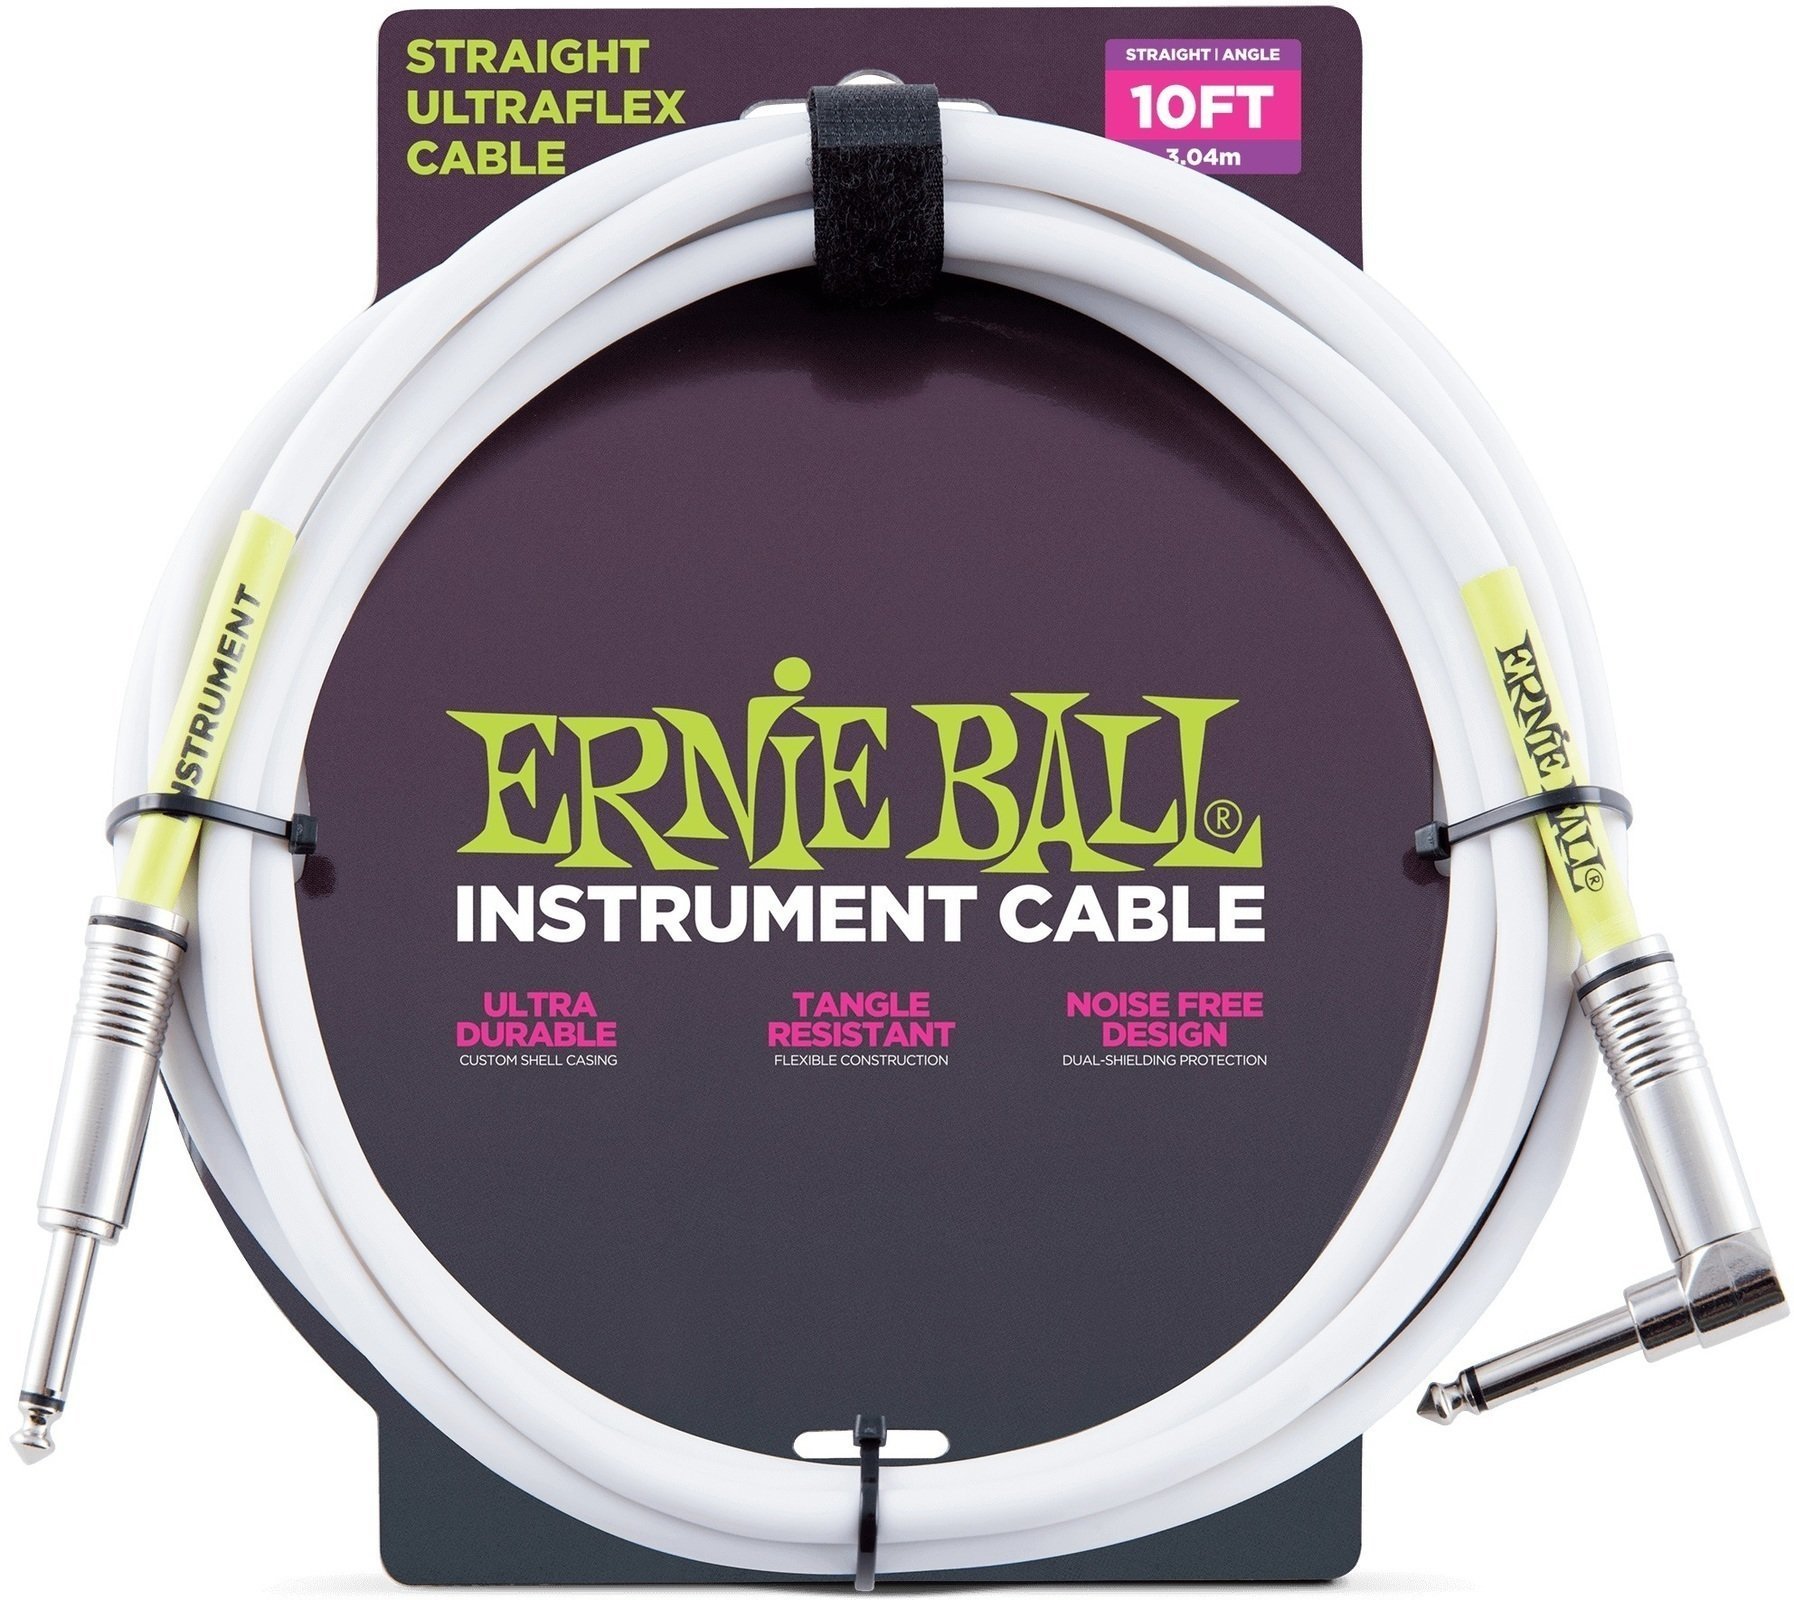 Instrument Cable Ernie Ball P06049 White 3 m Straight - Angled